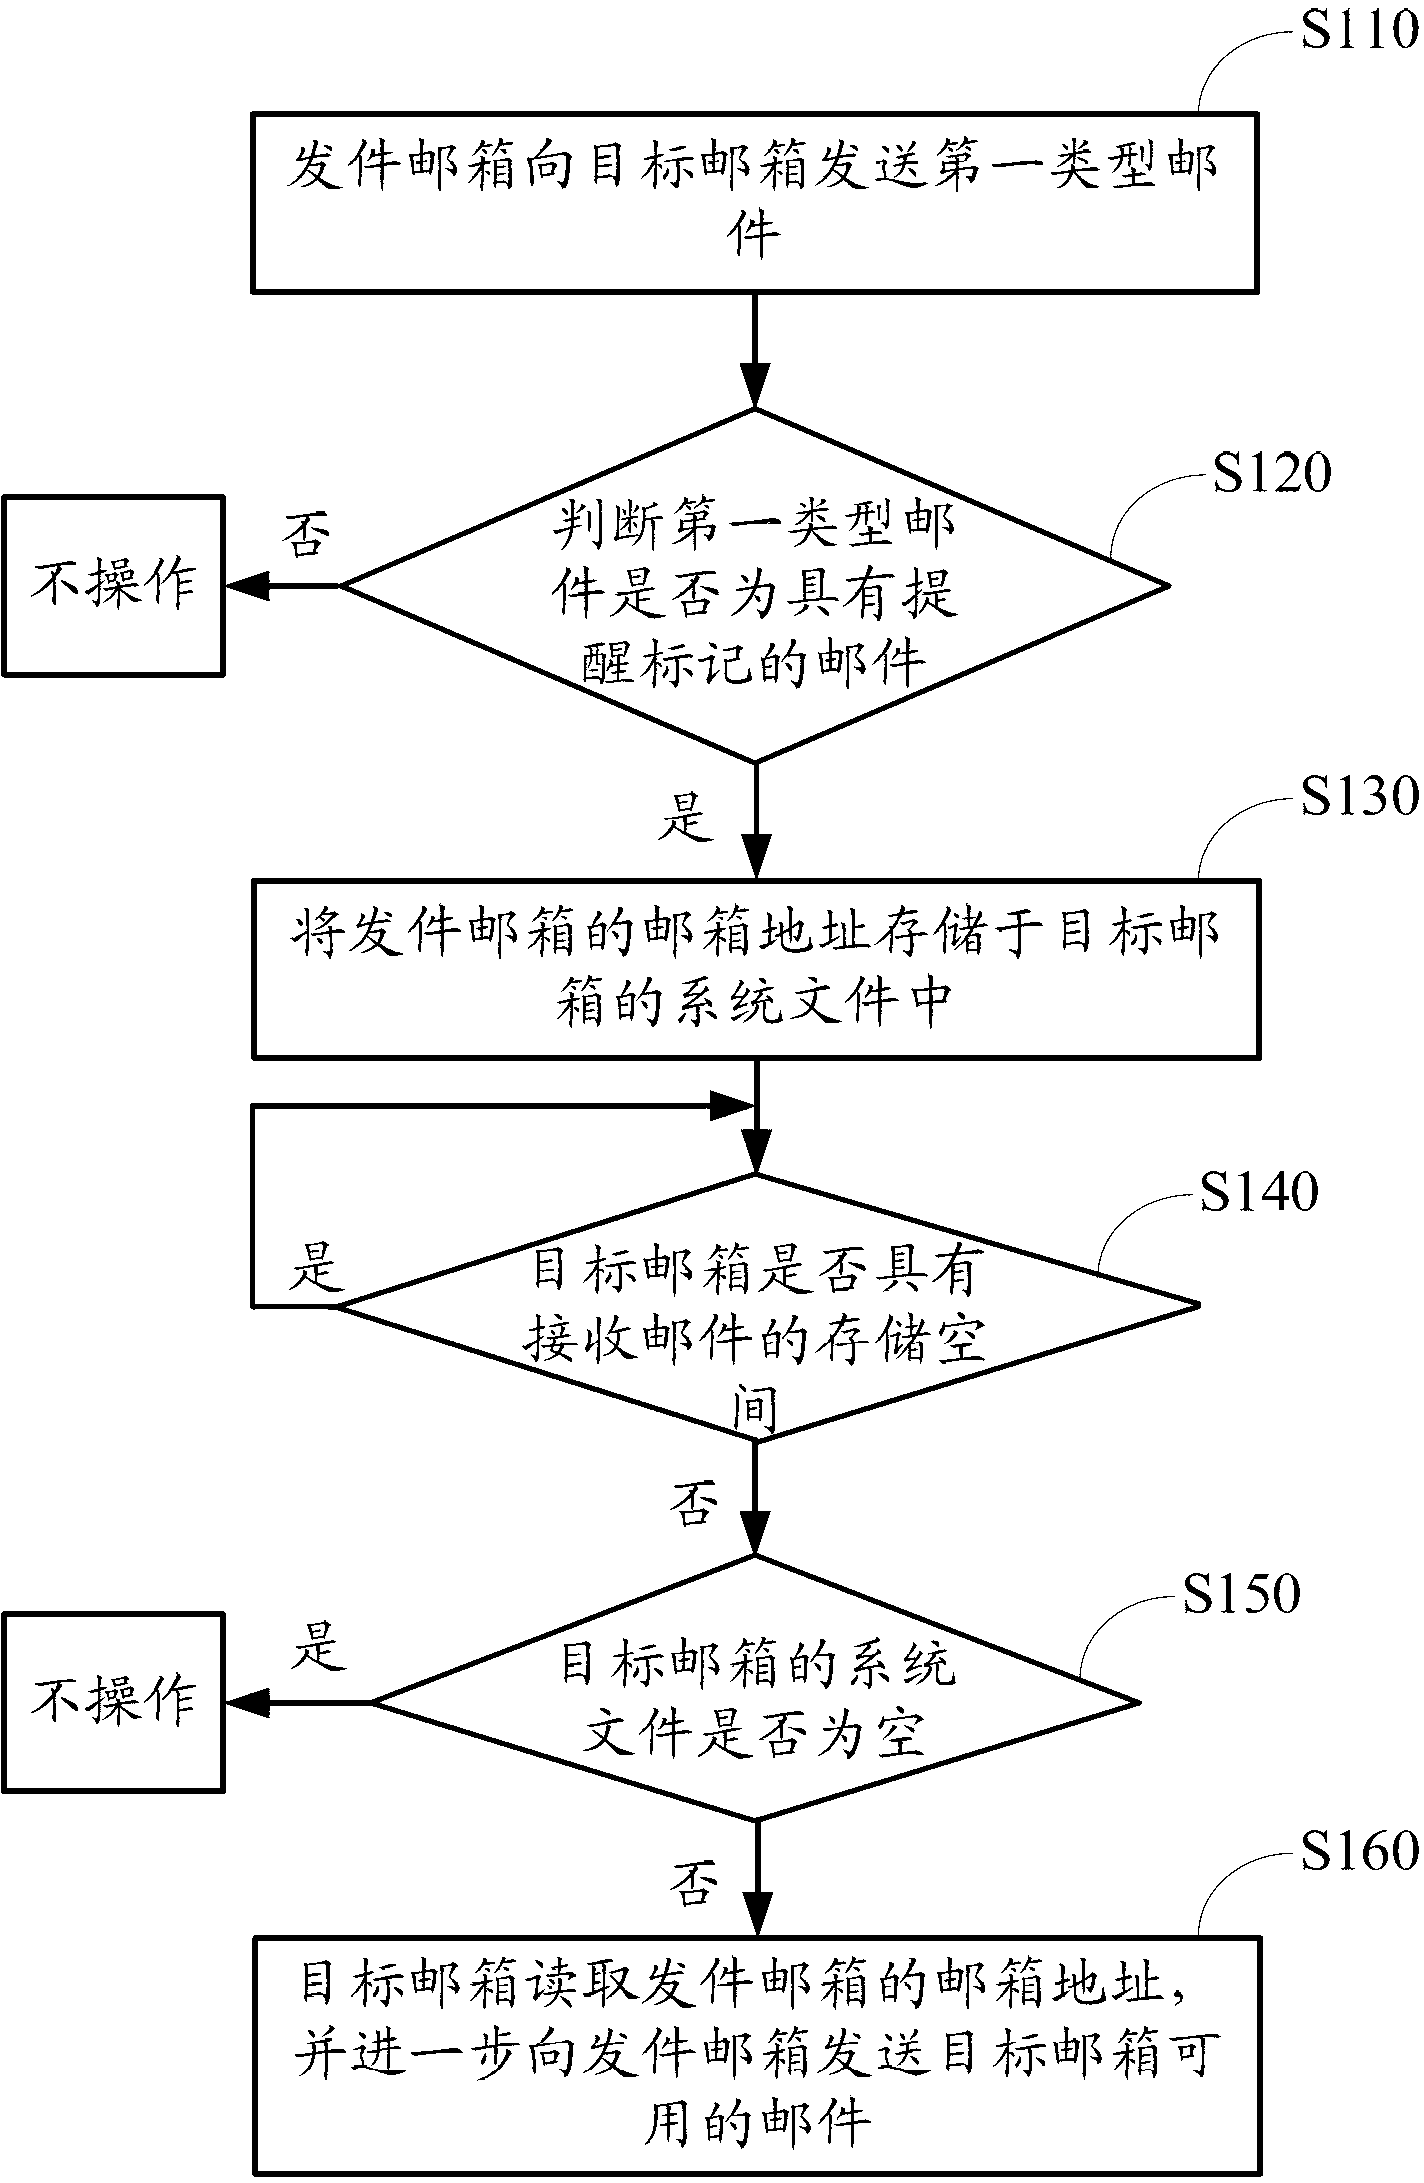 Method and system for reminding availability of E-mail box